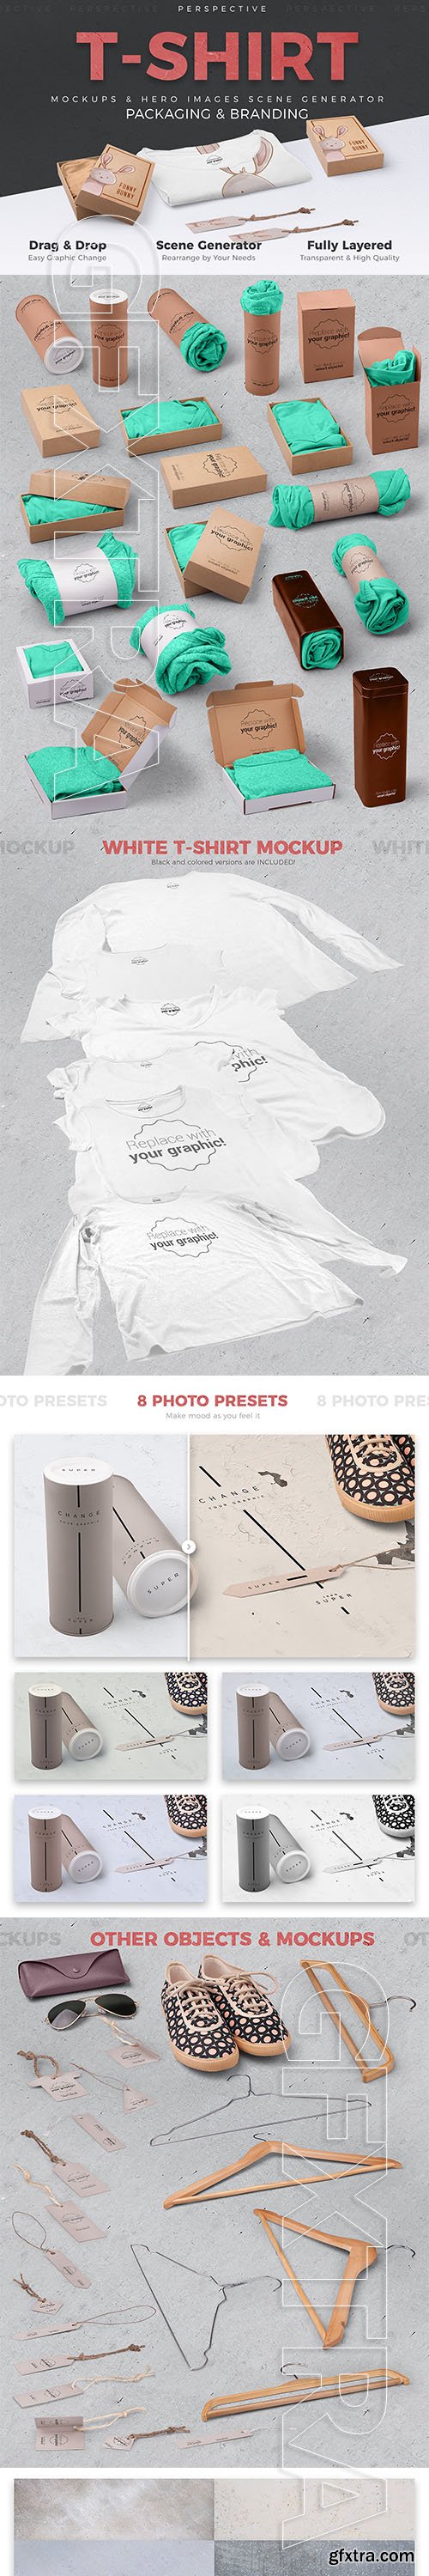 CreativeMarket - T-shirt Packages Perspective View 4523627